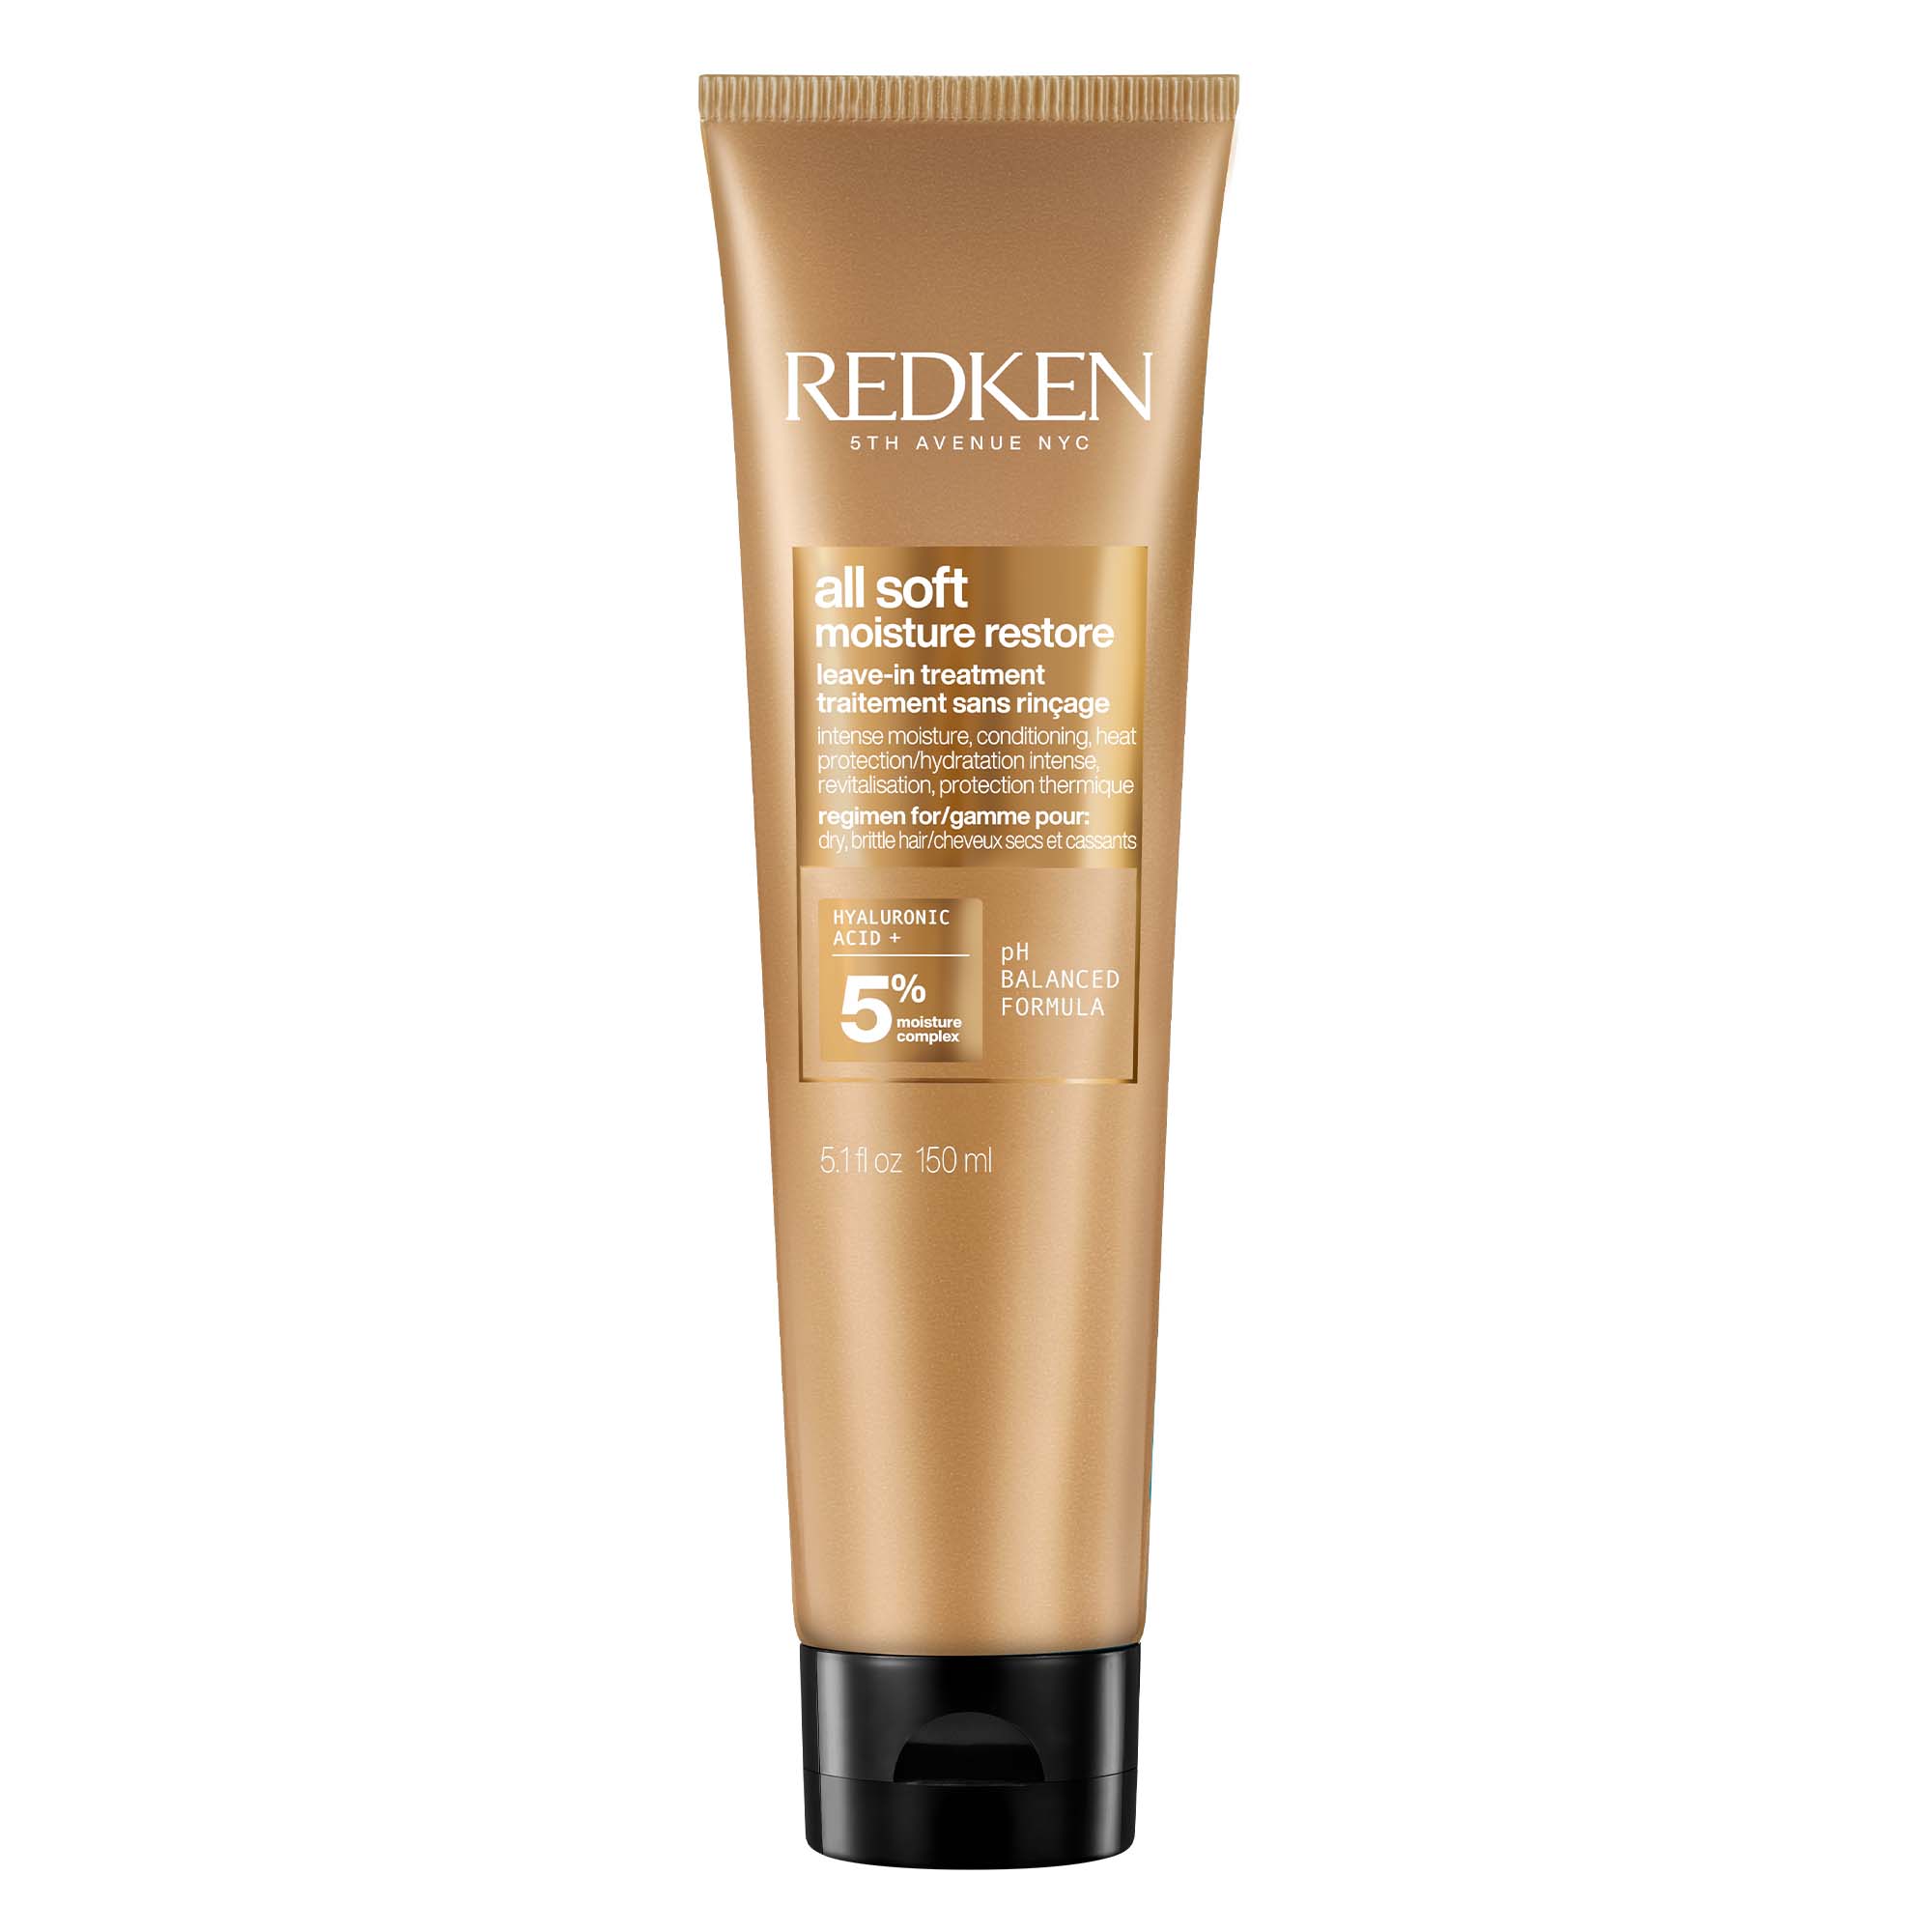 https://www.redken.ca/-/media/project/loreal/brand-sites/redken/americas/ca/product-information/product-images/haircare/all-soft/all-soft-moisture-restore-leave-in-treatment-pdp/redken-2022-all-soft-moisture-restore-na-packshot-2000x2000_fr-01.jpg?rev=3850bf4a6be44841bfa02d3df9477e4a